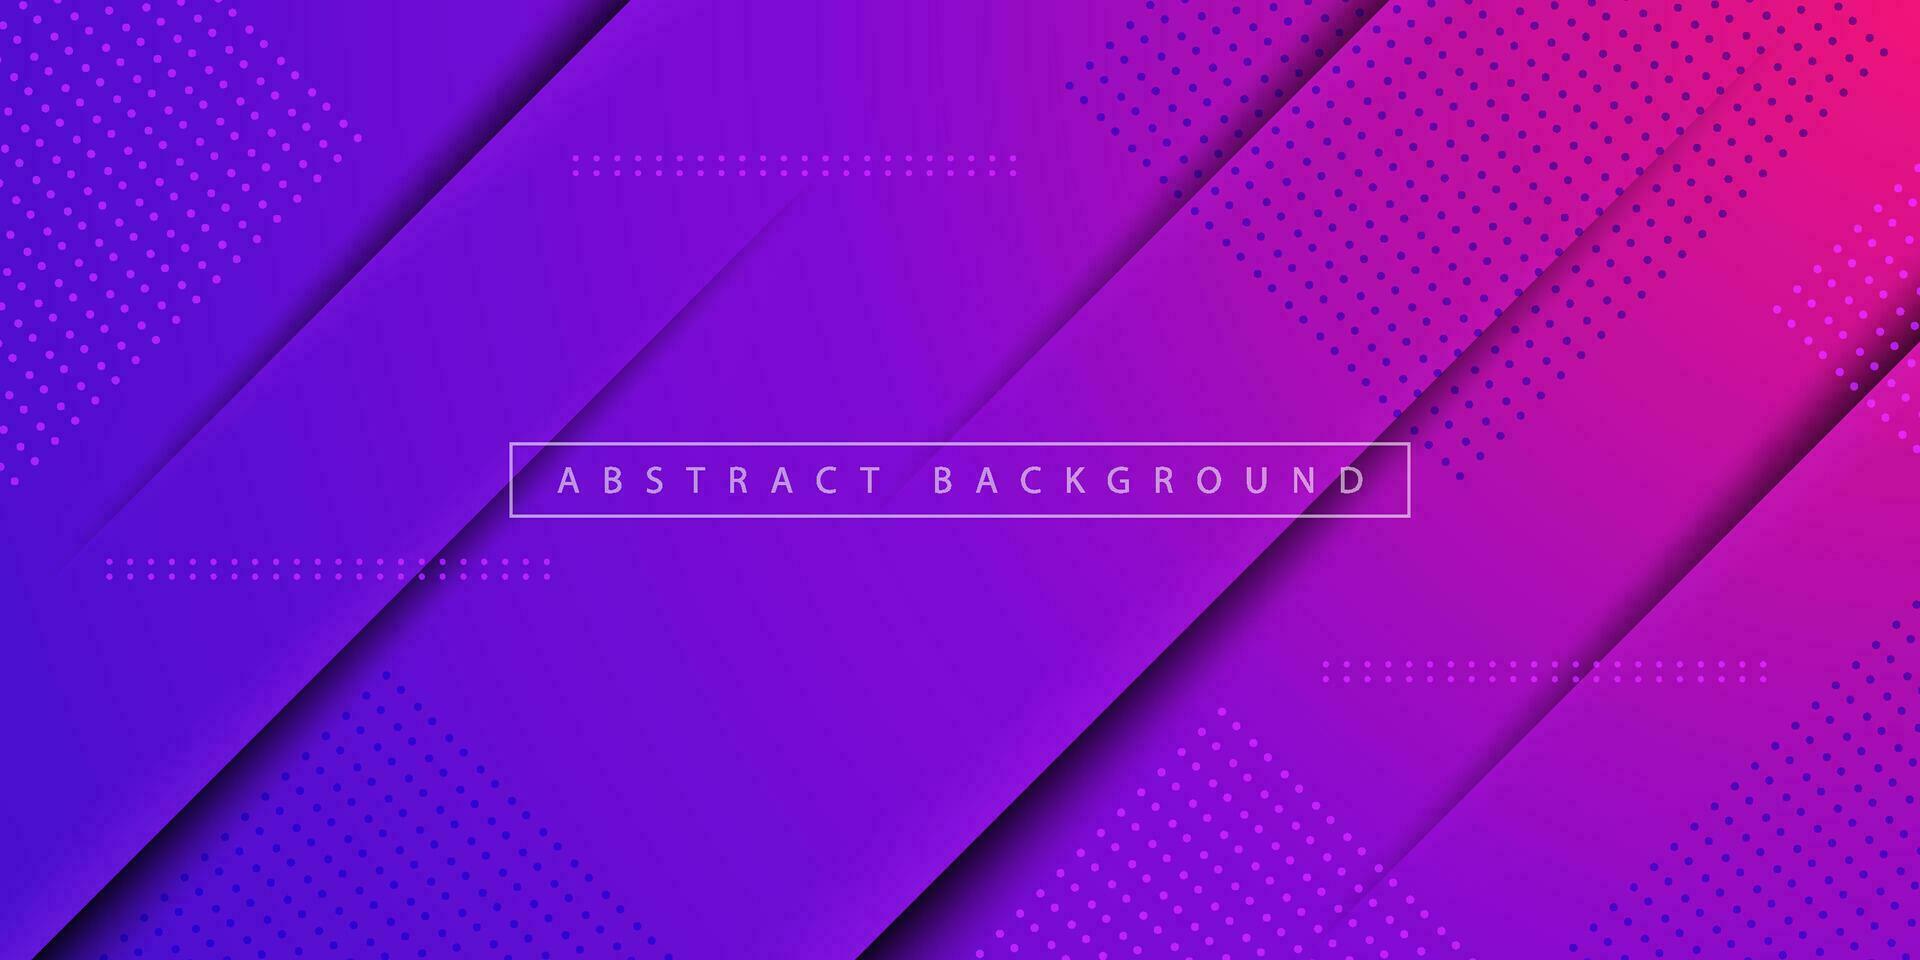 Abstract pink and purple gradient background with stripe shapes and shadow texture. Colorful simple design. Cool and modern concept. Eps10 vector